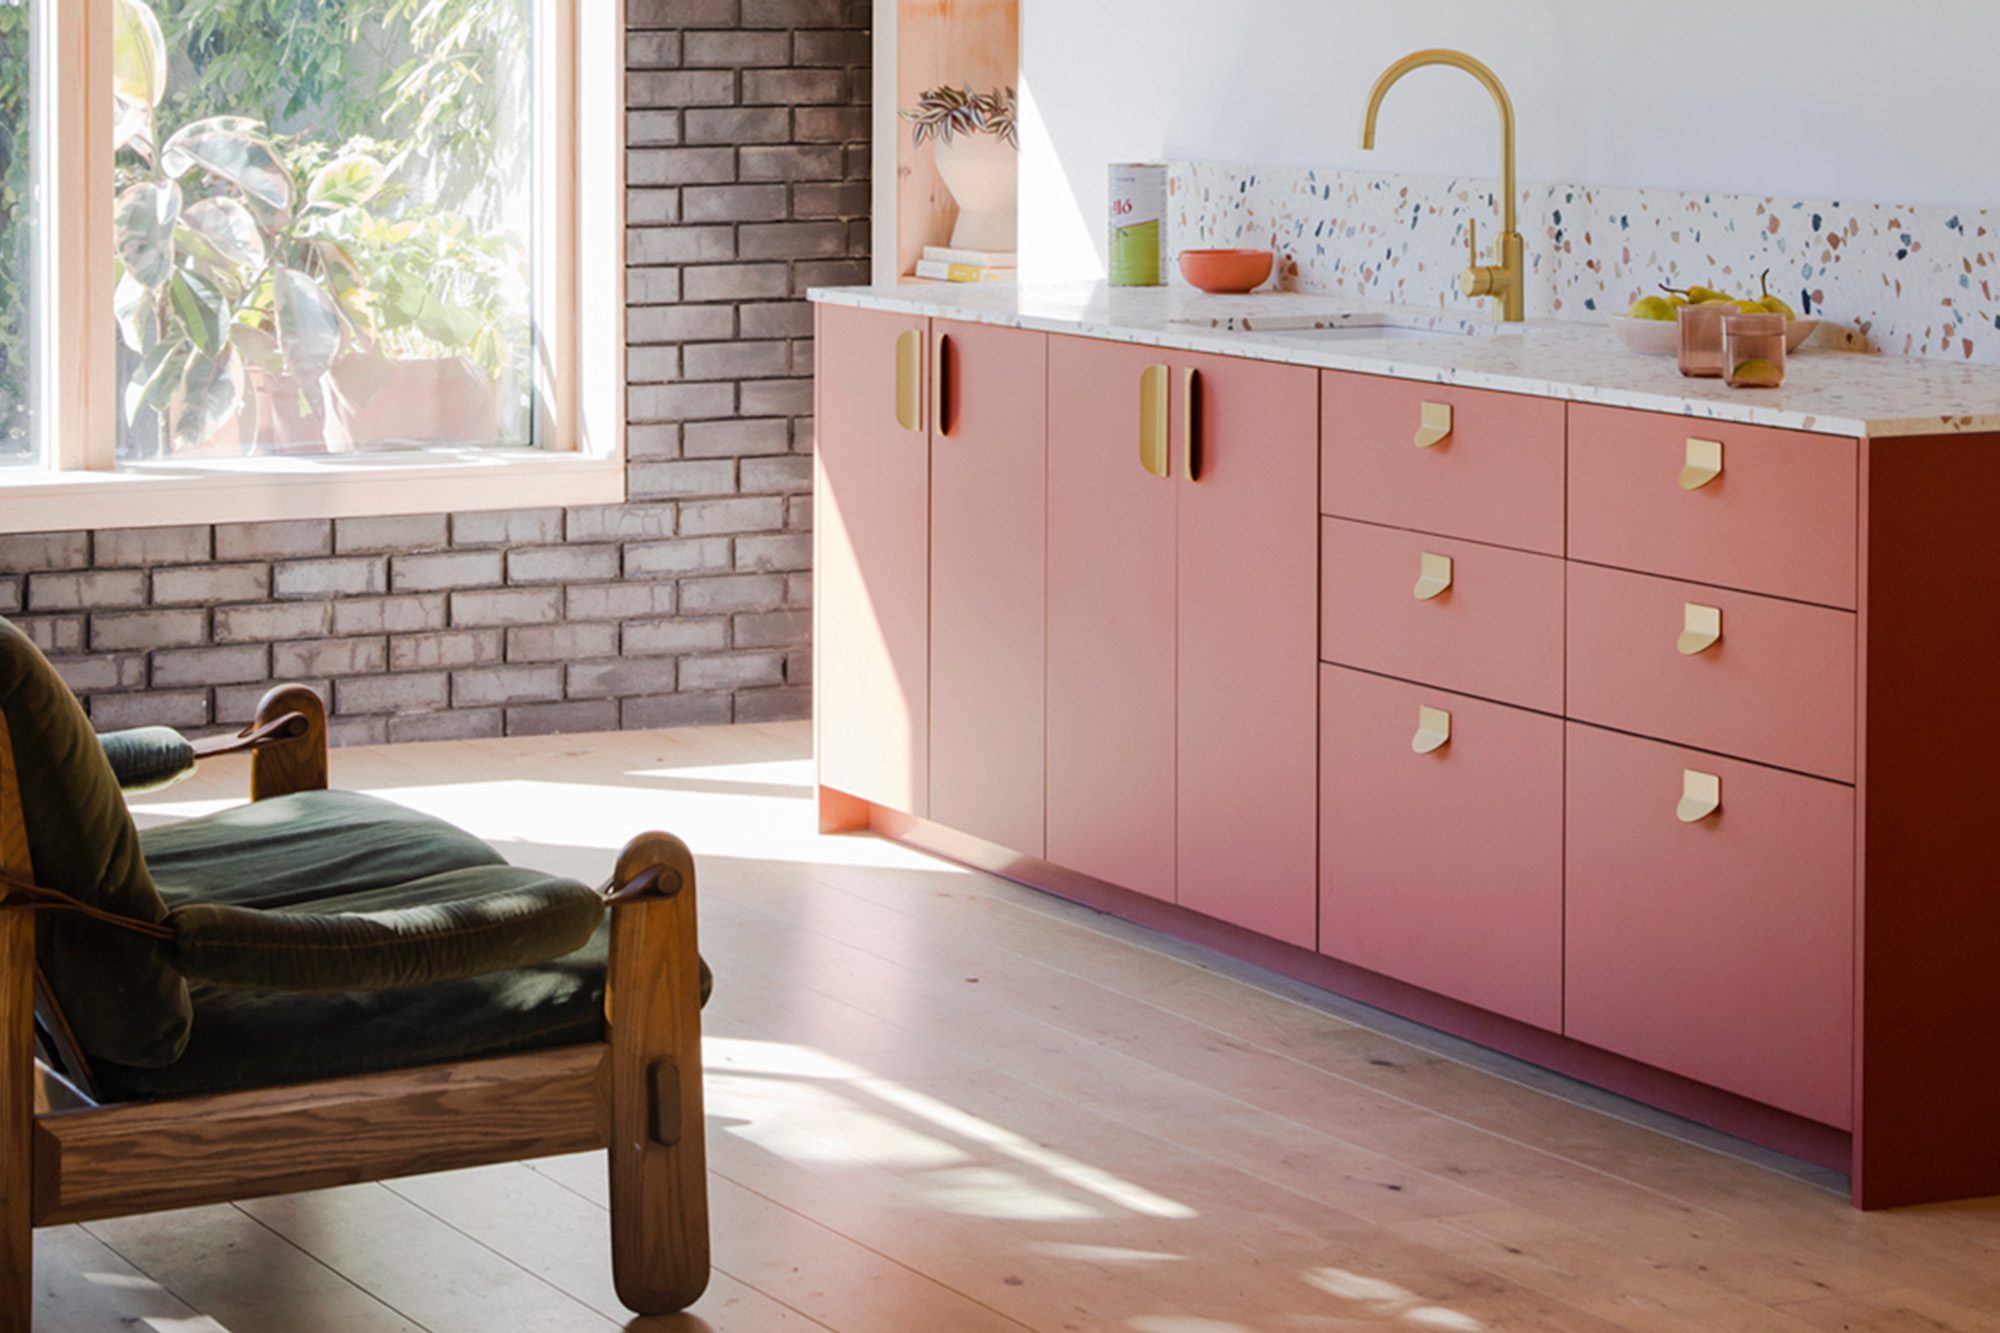 Made By HUSK's Terra Kitchen, featuring Plank Hardware on pink kitchen fronts.